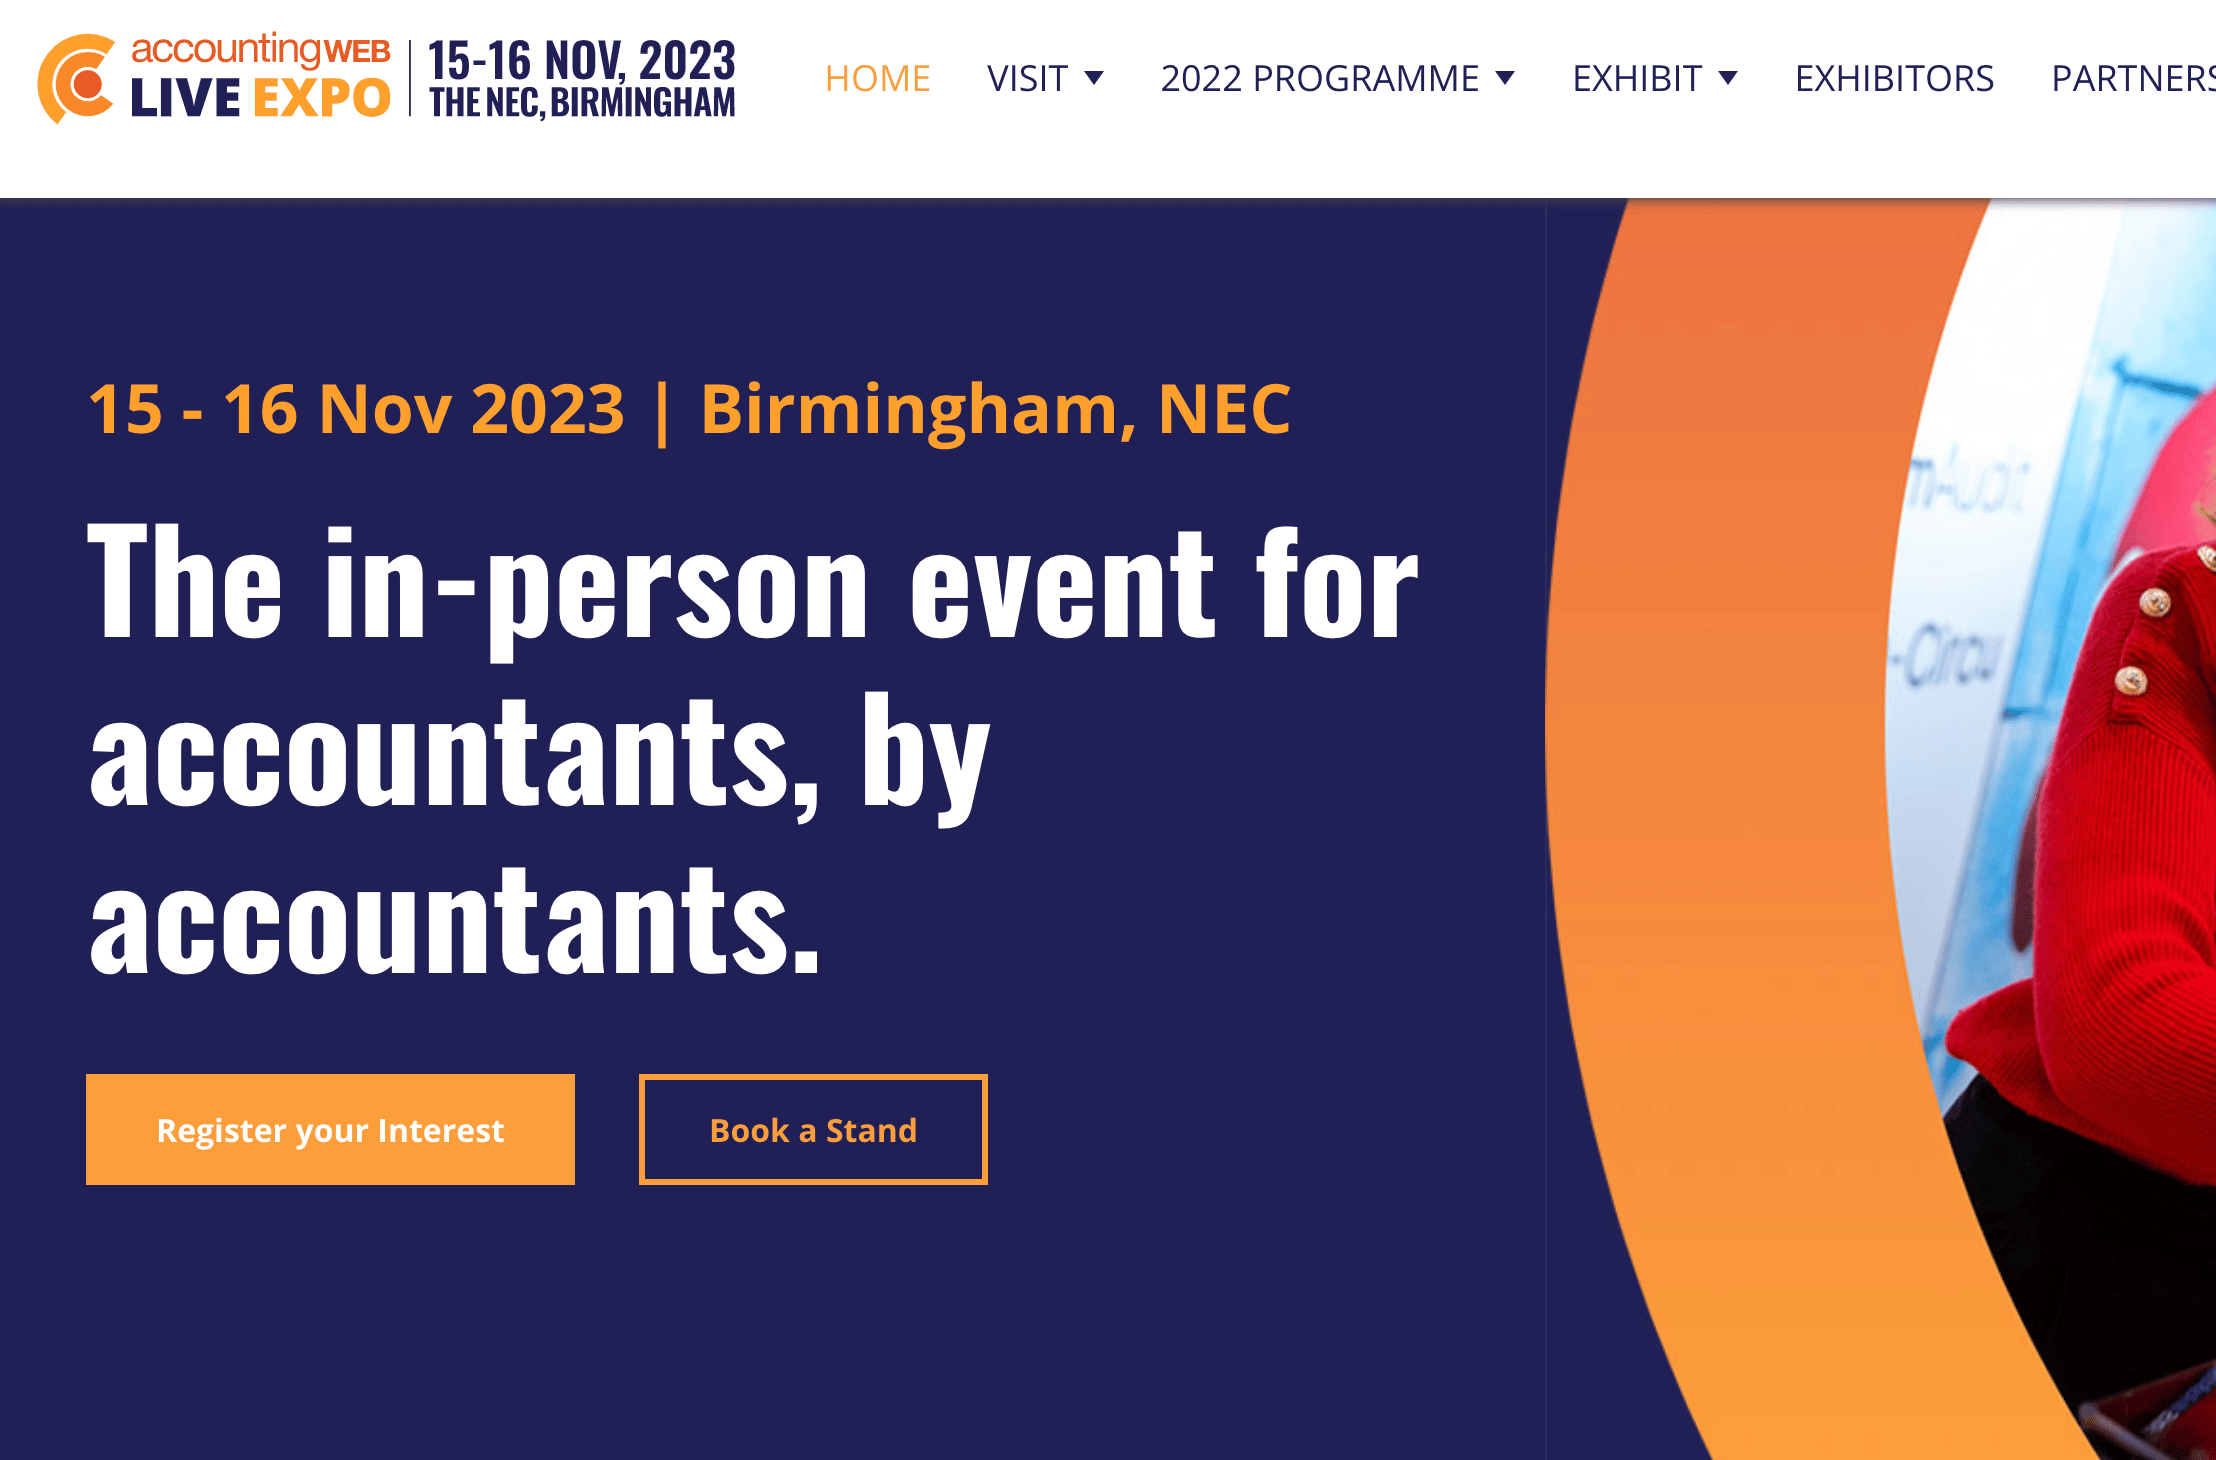 Accounting Conferences 2023 - Accountingweb Live Expo Landing Page